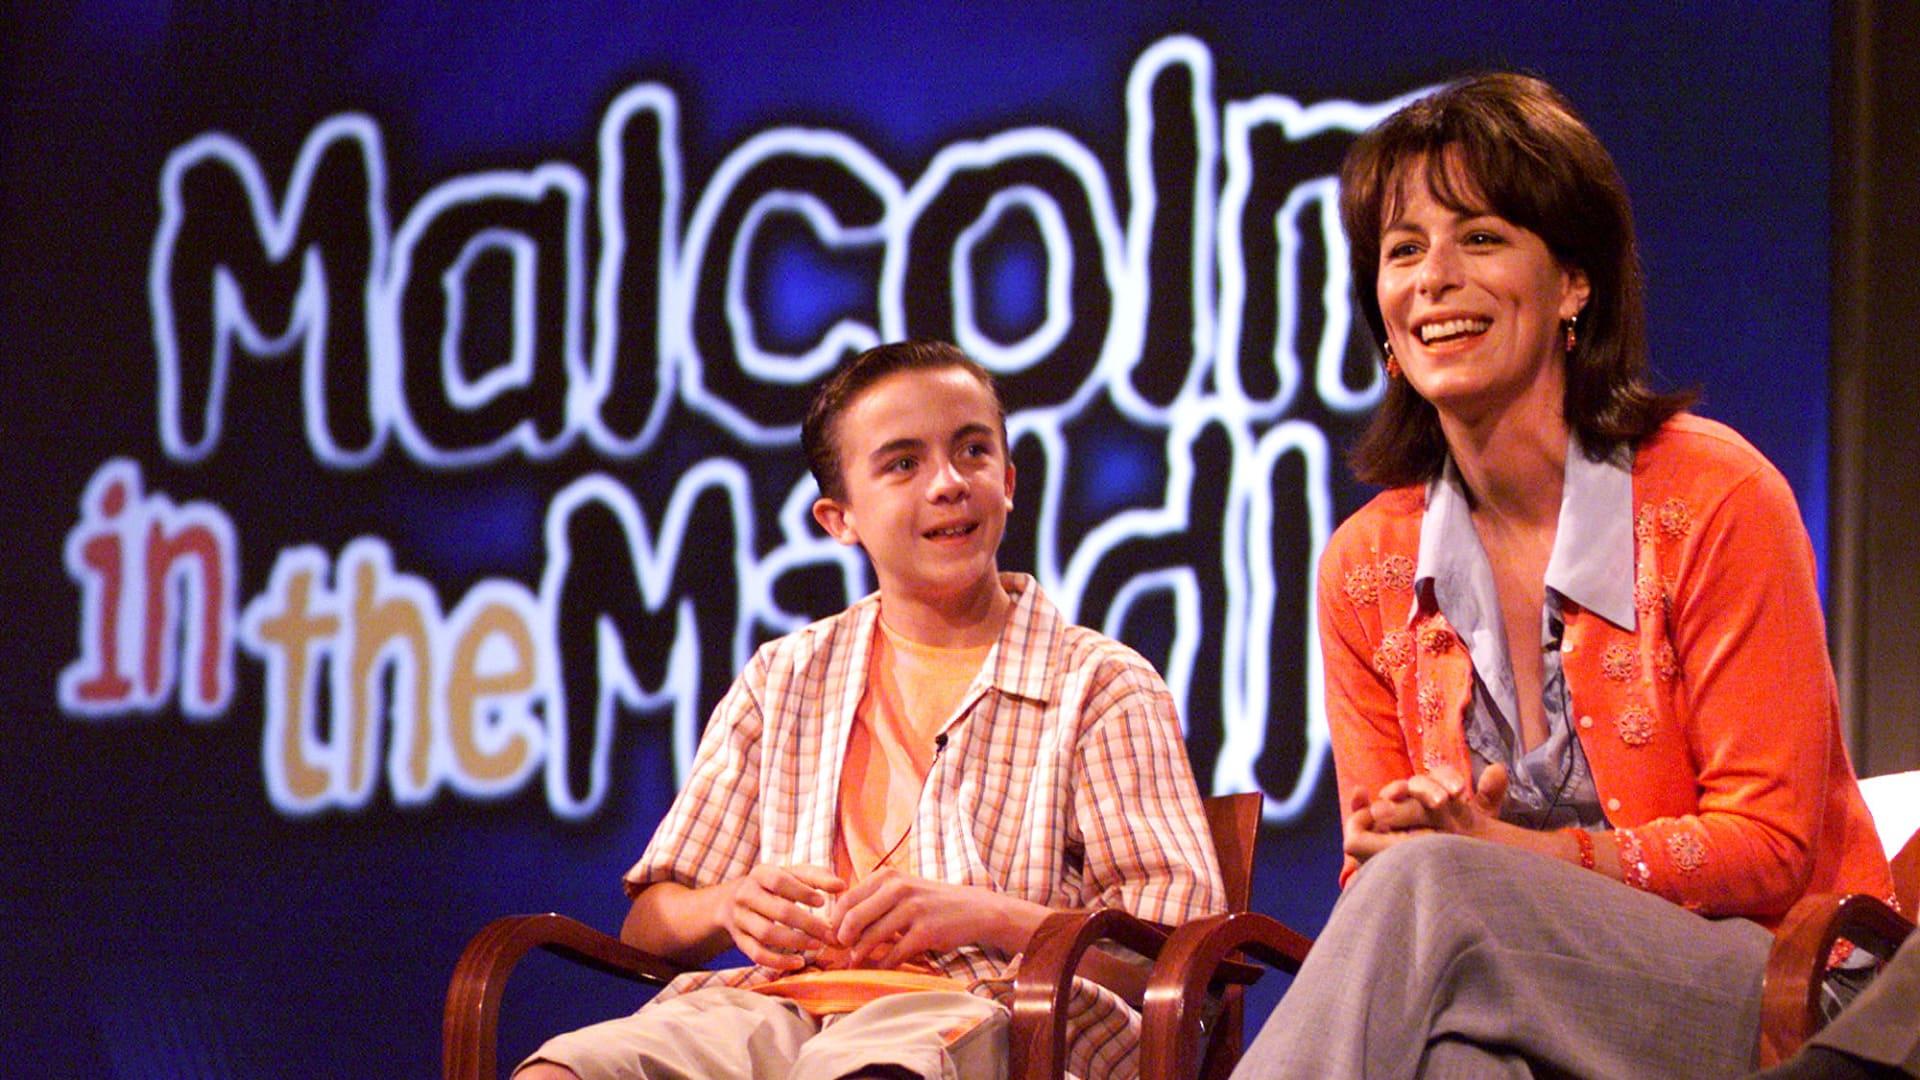 Frankie Muniz and co-star Jane Kaczmarek during a 'Malcolm in the Middle' press tour in 2000.